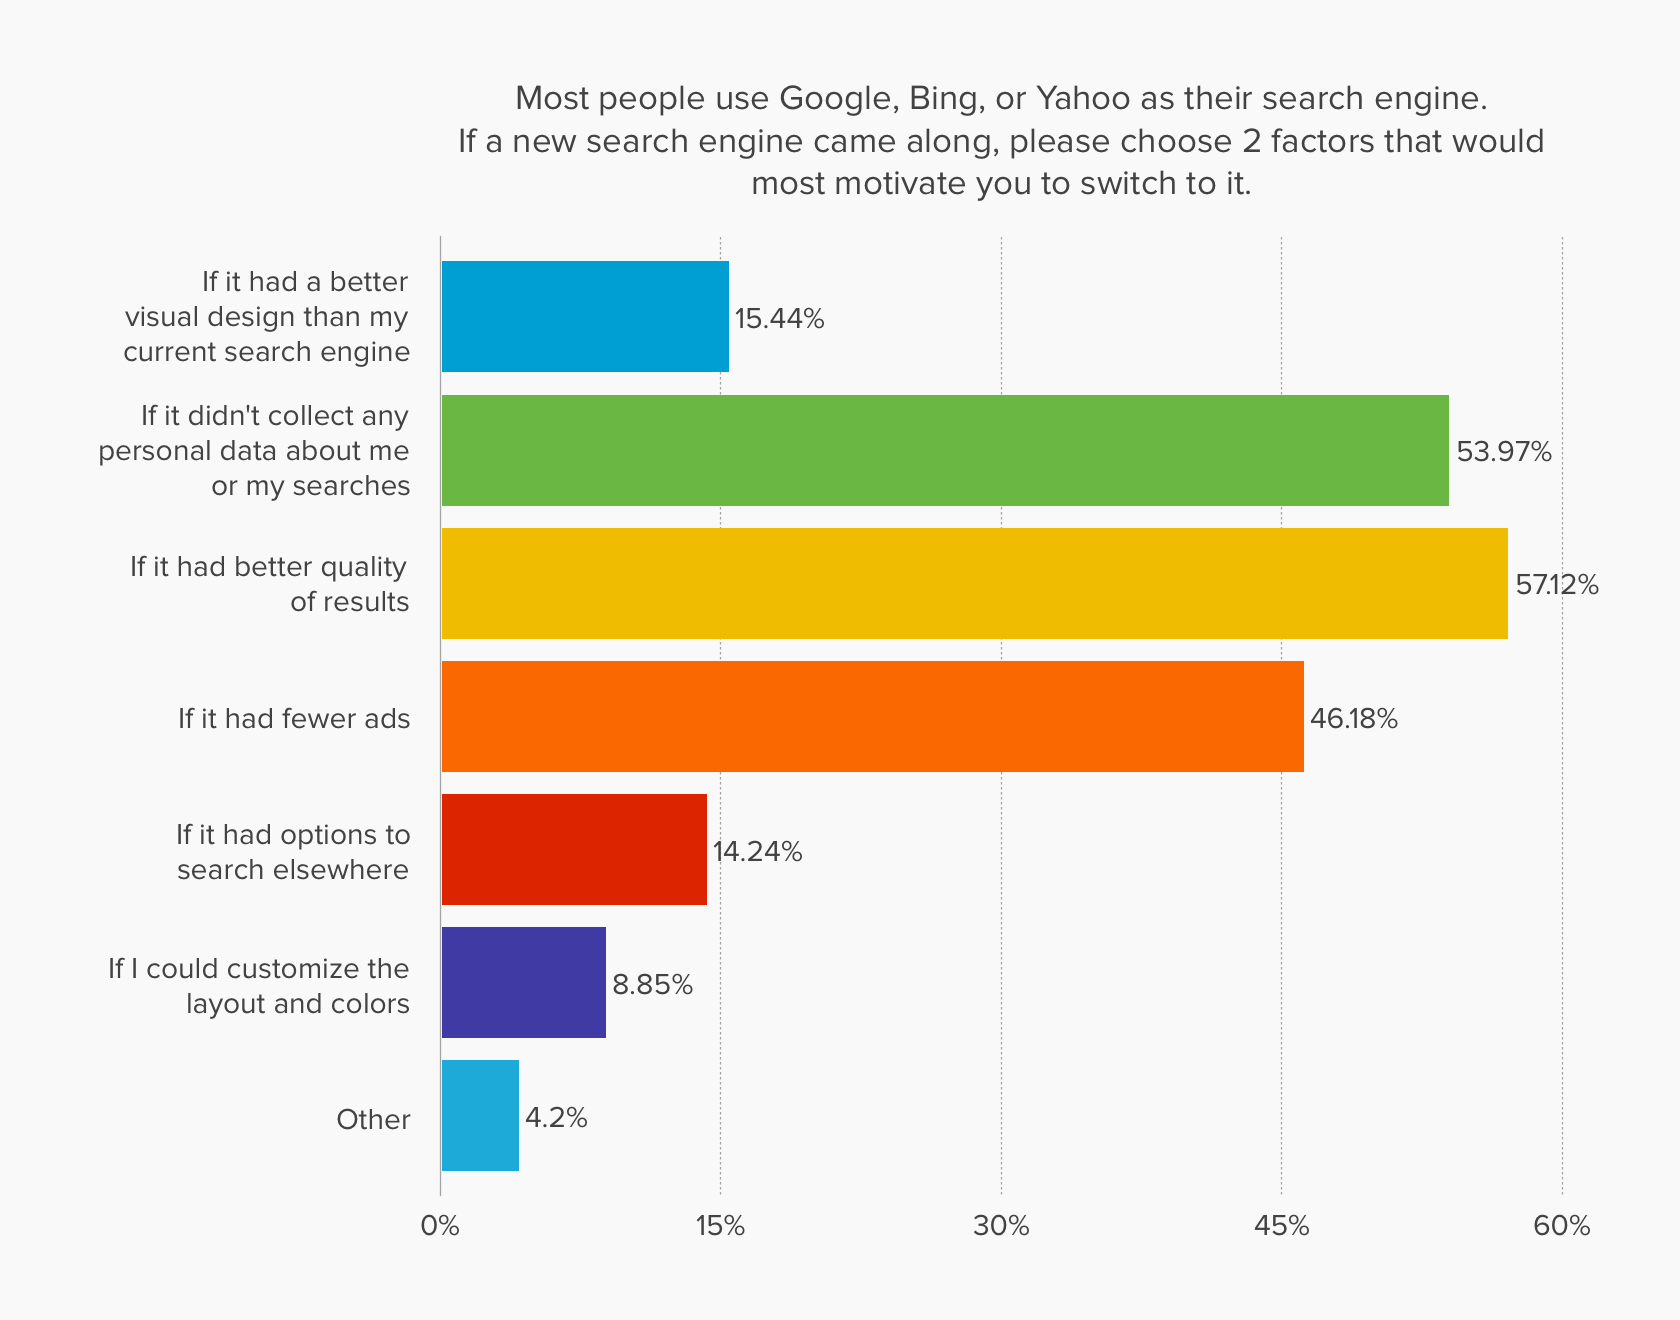 chart showing that Canadian adults would be motivated to switch to a search engine that didn't collect any personal data about them or their searches